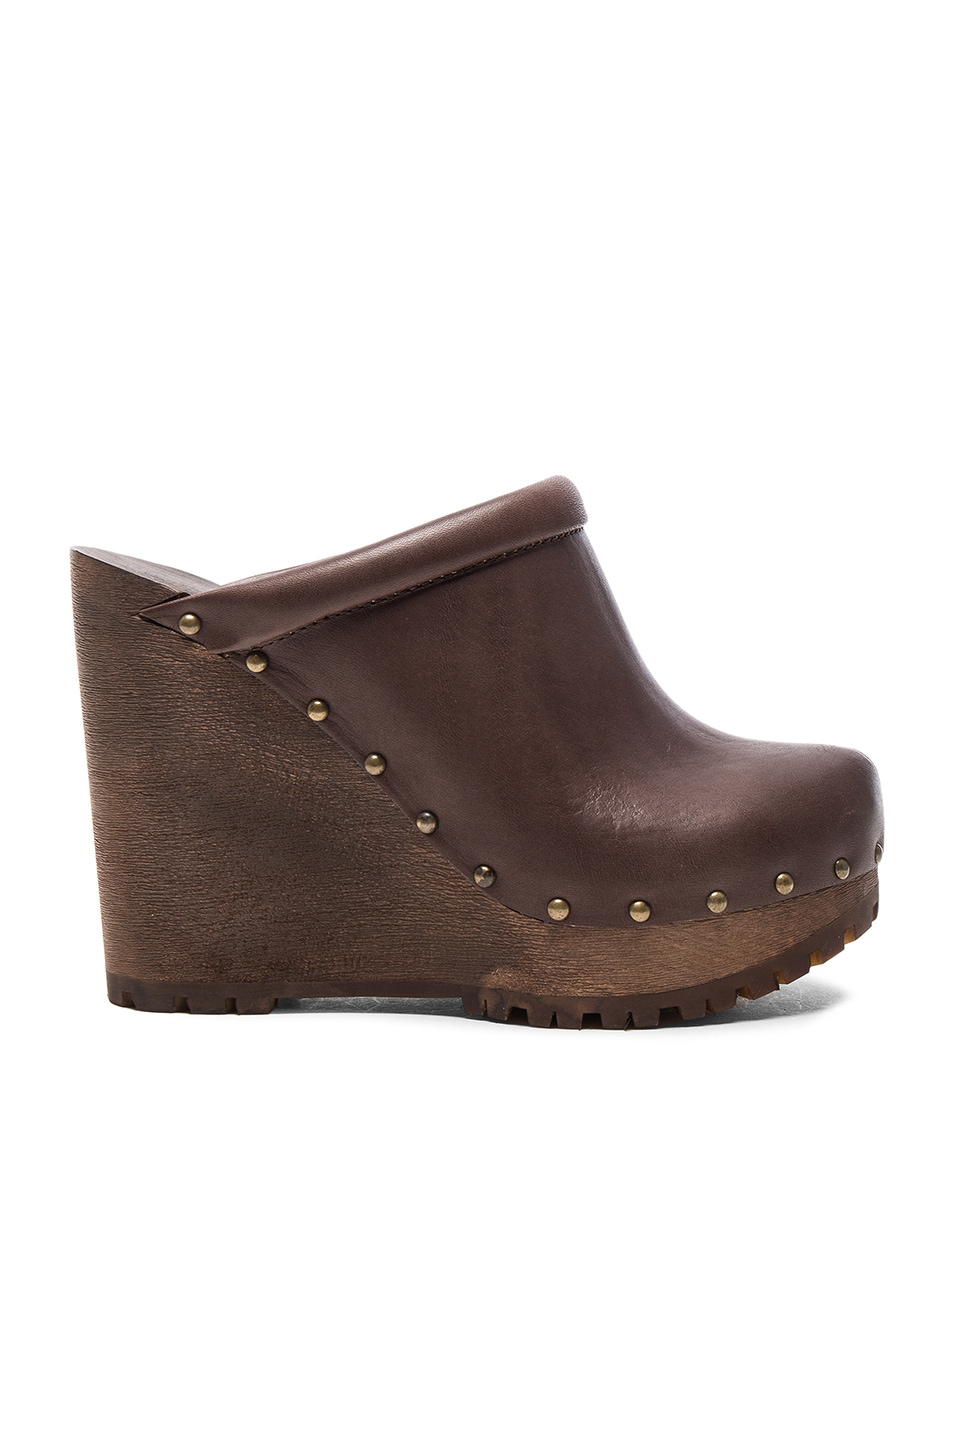 Image 1 of See By Chloe Leather Clive Wedges in Dark Brown